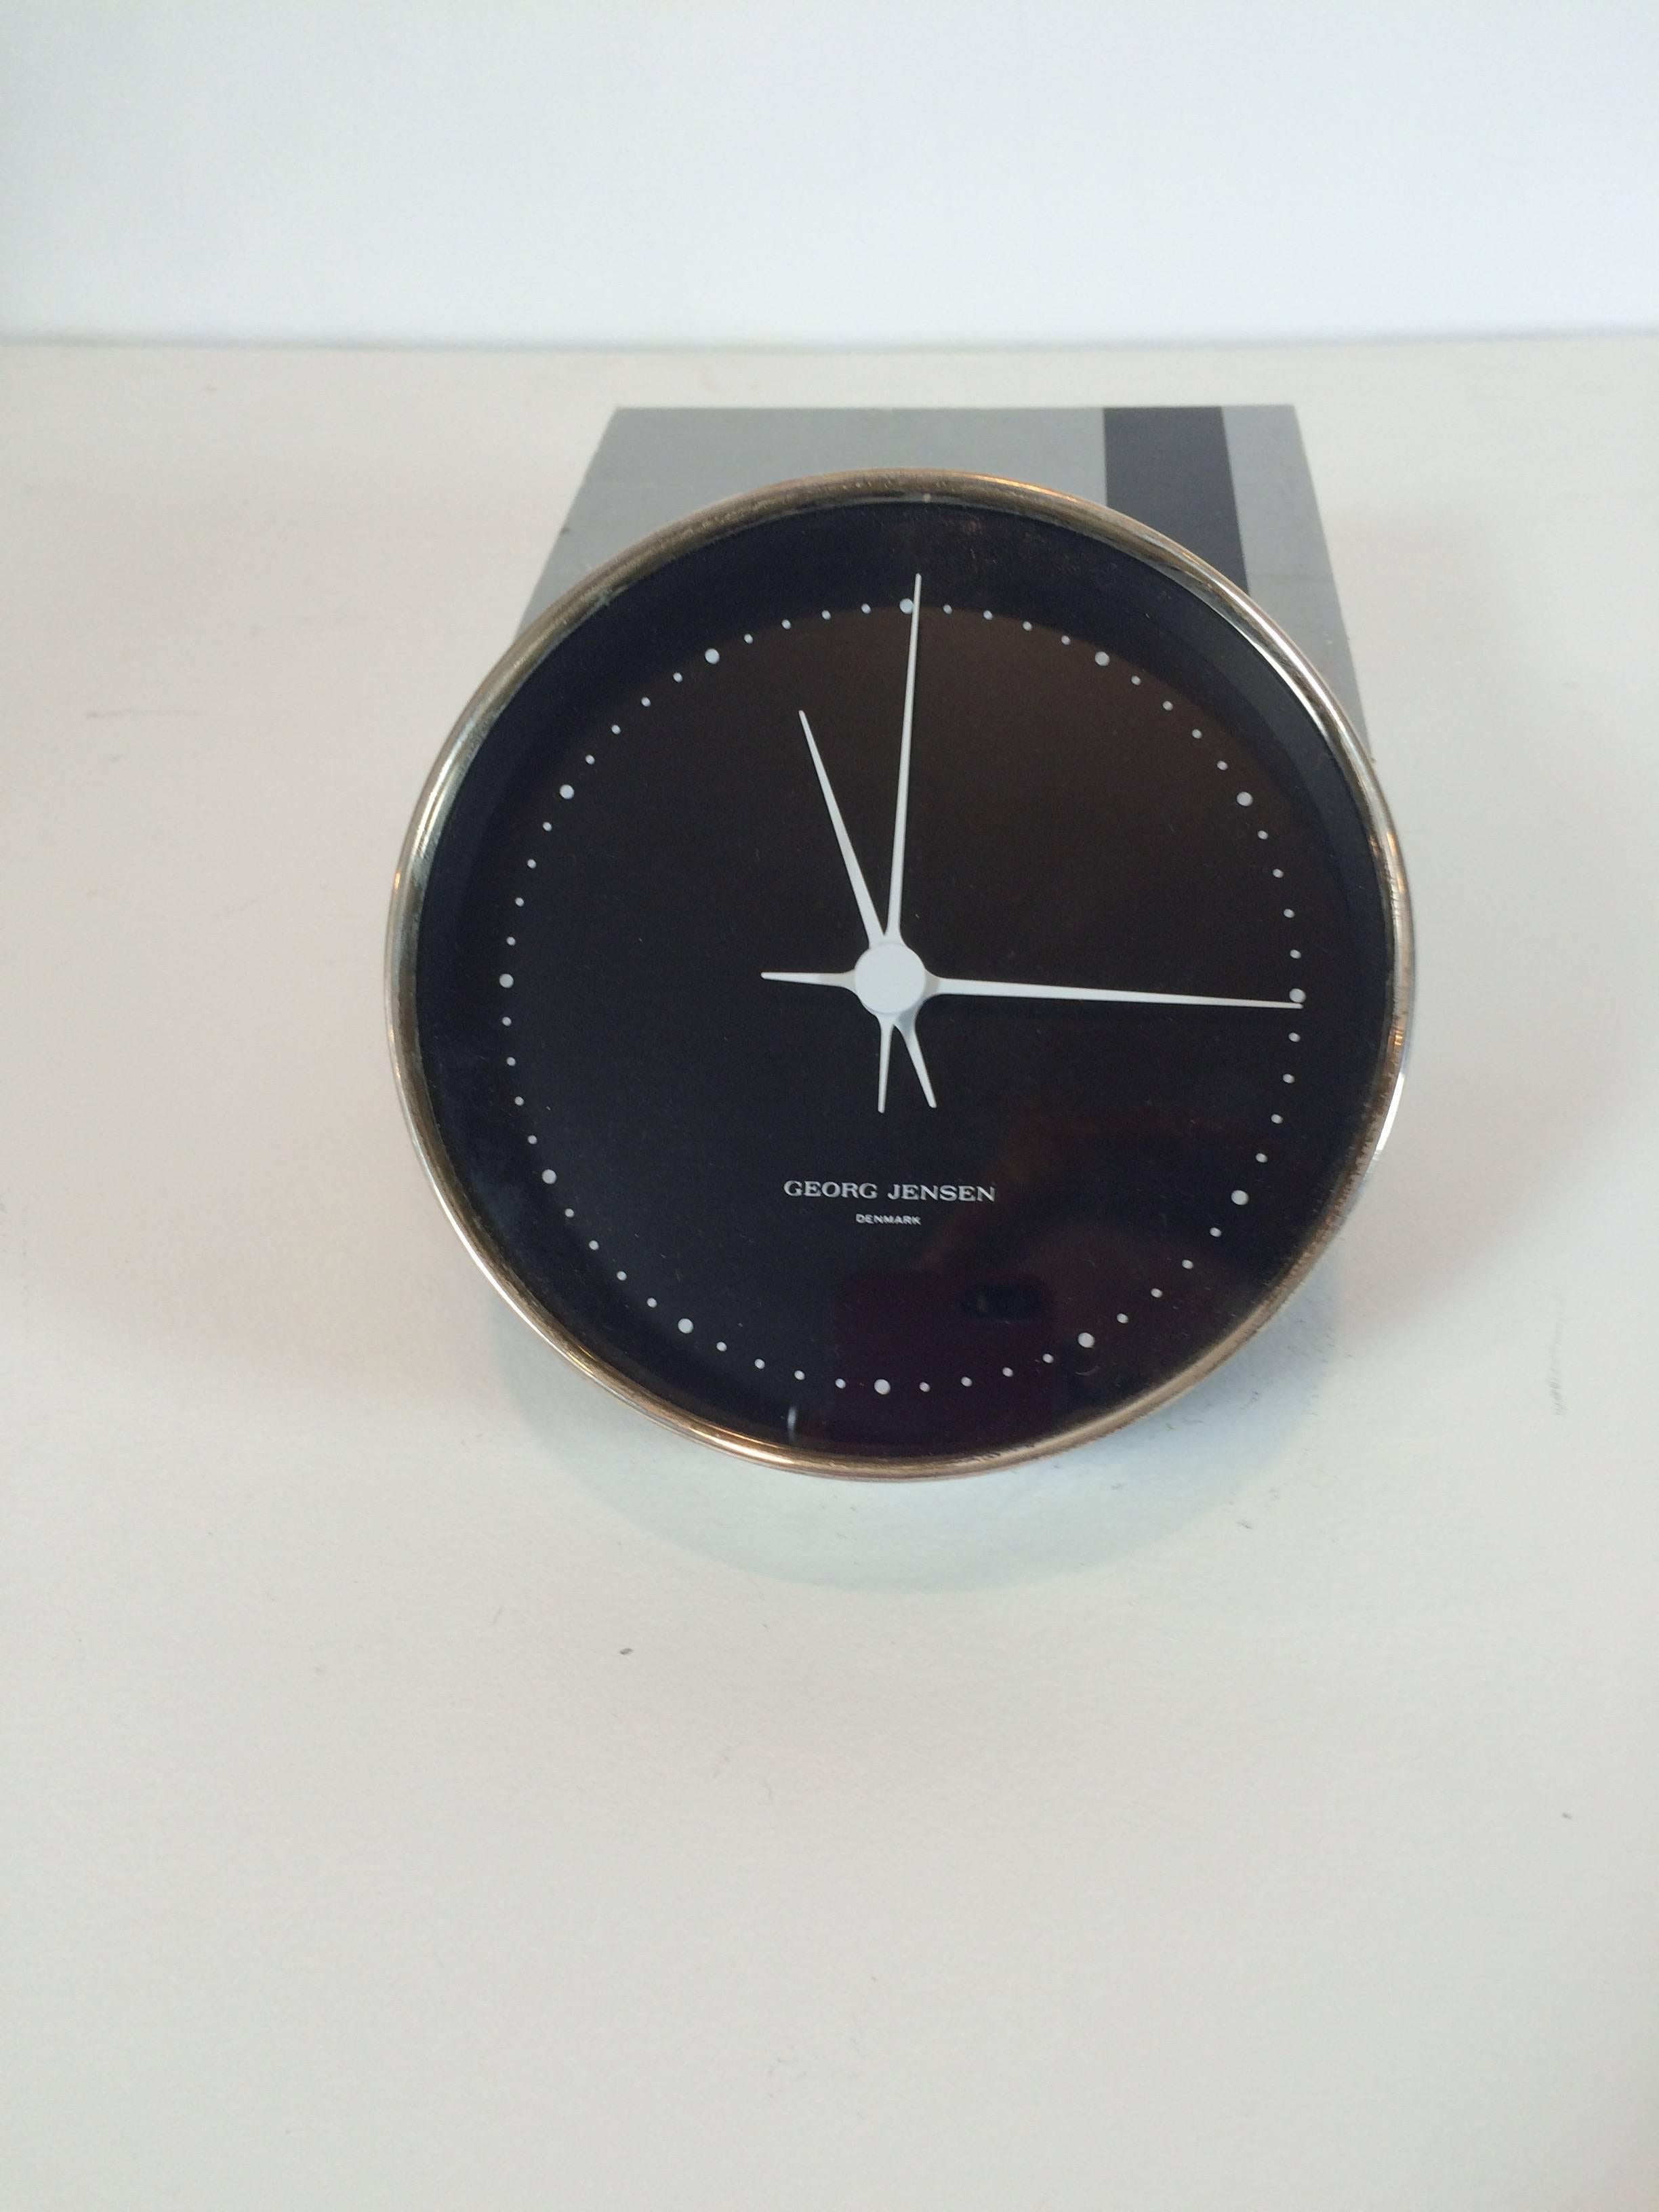 Very rare Georg Jensen sterling silver wall clock, signed, has German quartz movement, factory mark, sterling mark, and Henning Koppel's mark in the case.

Koppel timepiece designs were revolutionary when they debuted in 1978, today Koppel’s